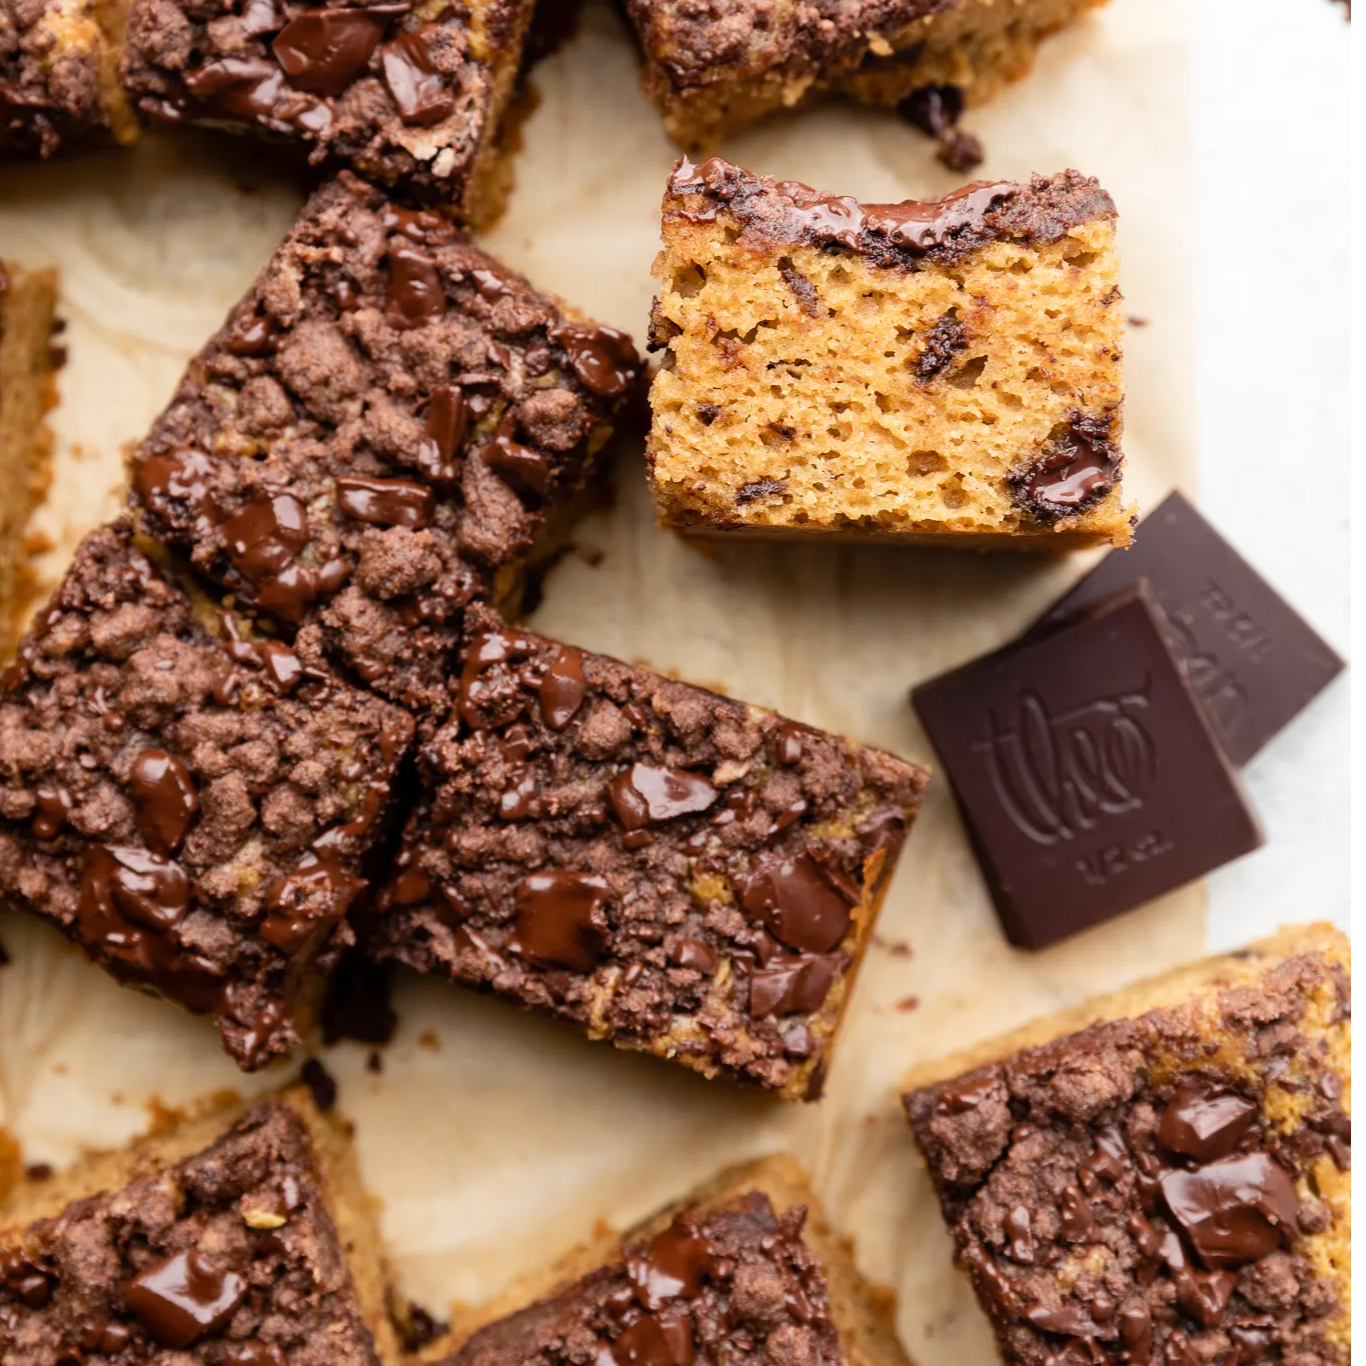 Pieces of gluten free chocolate coffee cake on parchment paper with Theo Chocolate squares